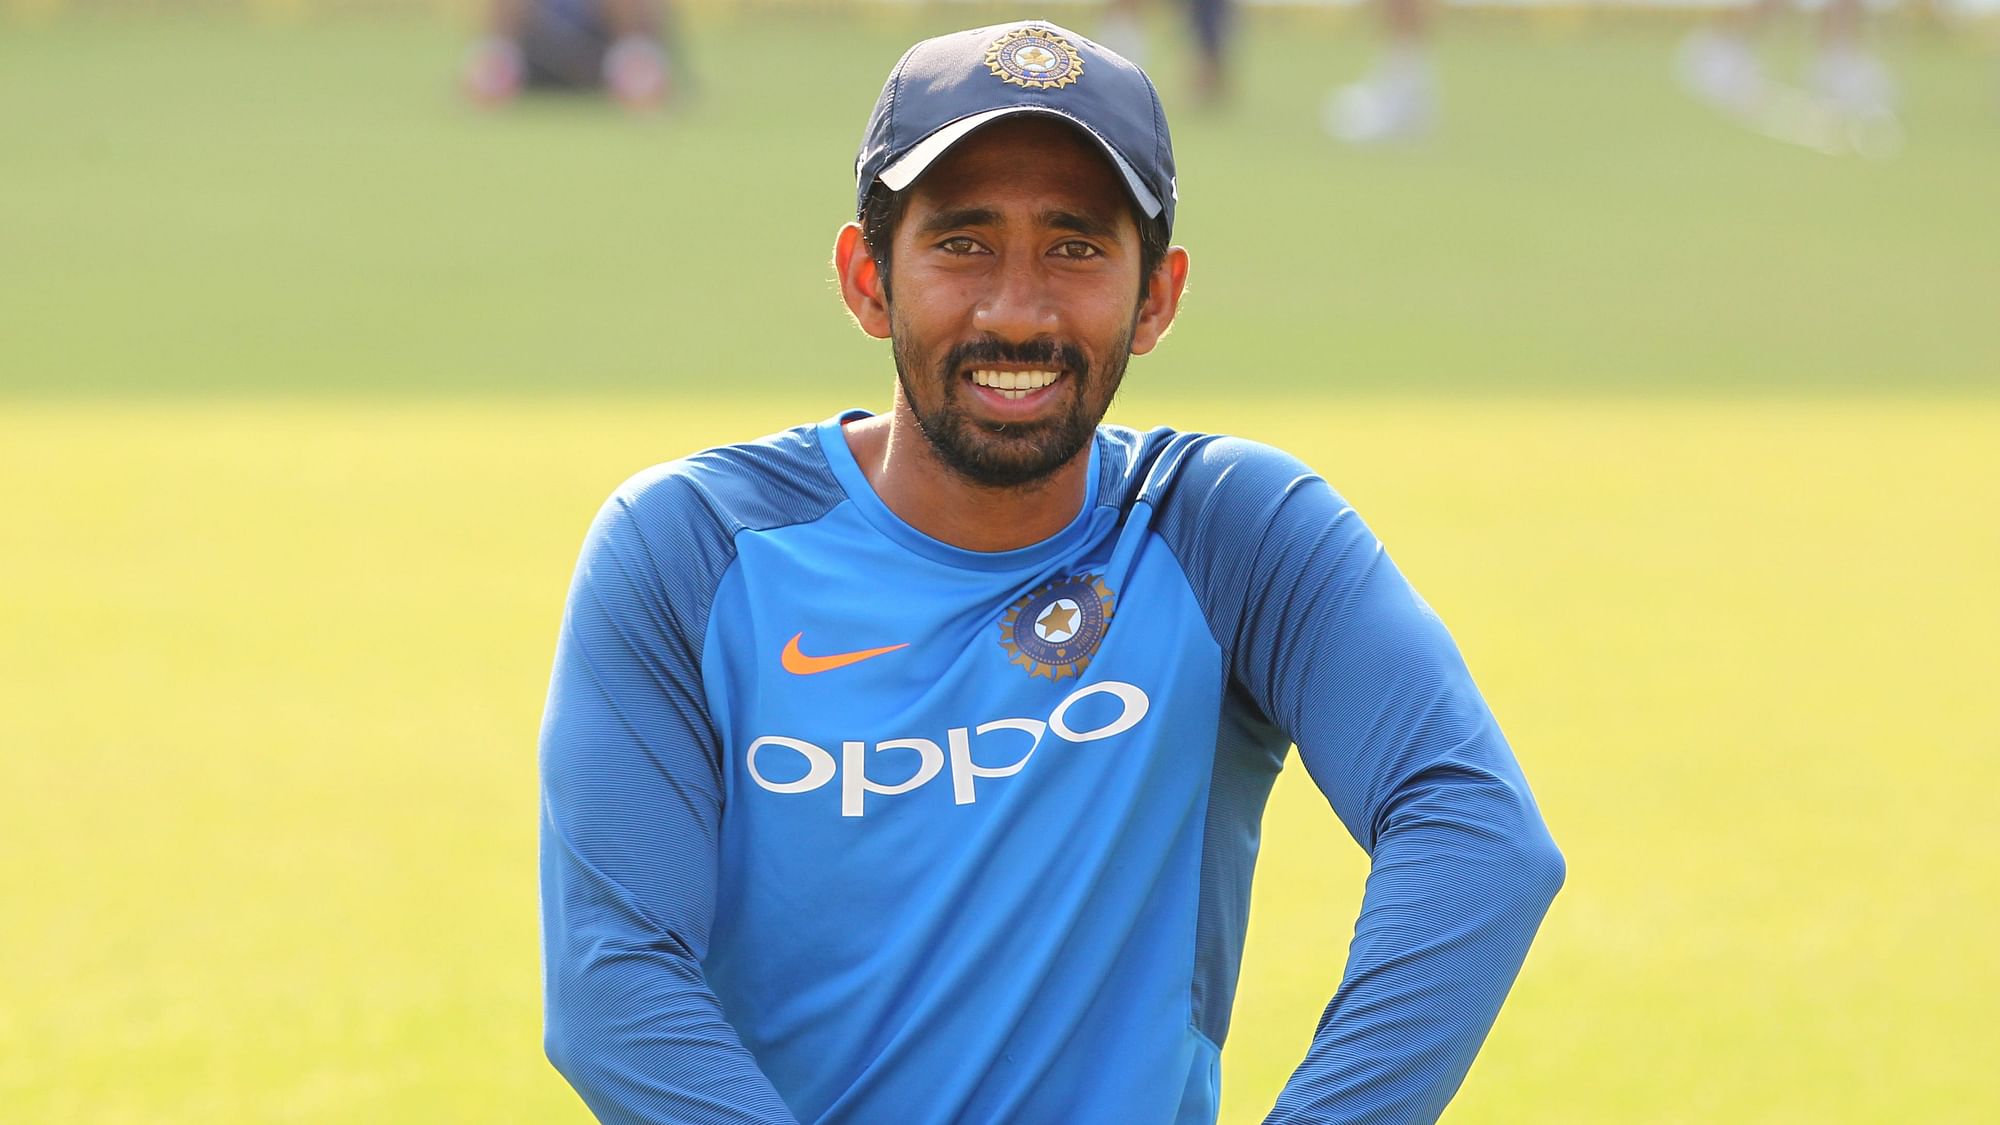 Wriddhiman Saha will keep for India in the first Test against South Africa.